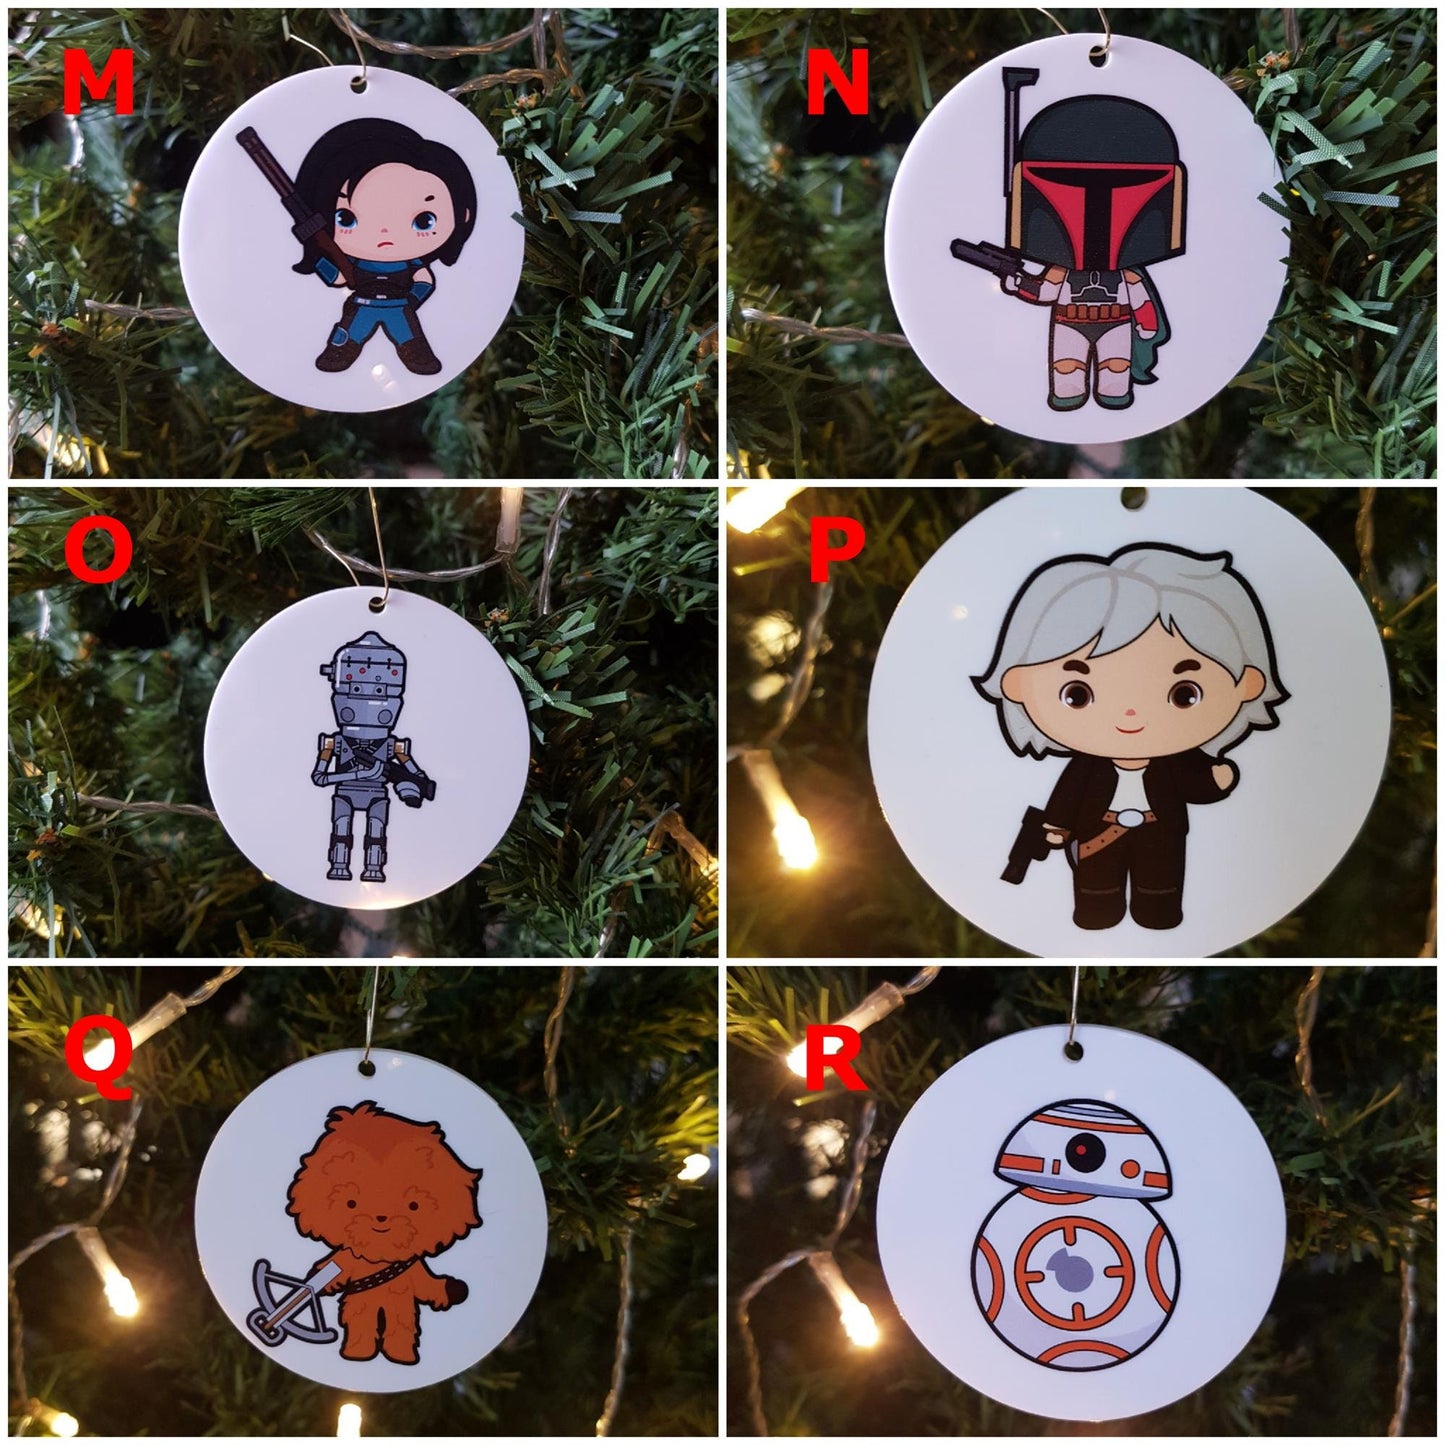 Christmas Decorations Star Wars Inspired. White Acrylic, Various Designs. Laser Cut.